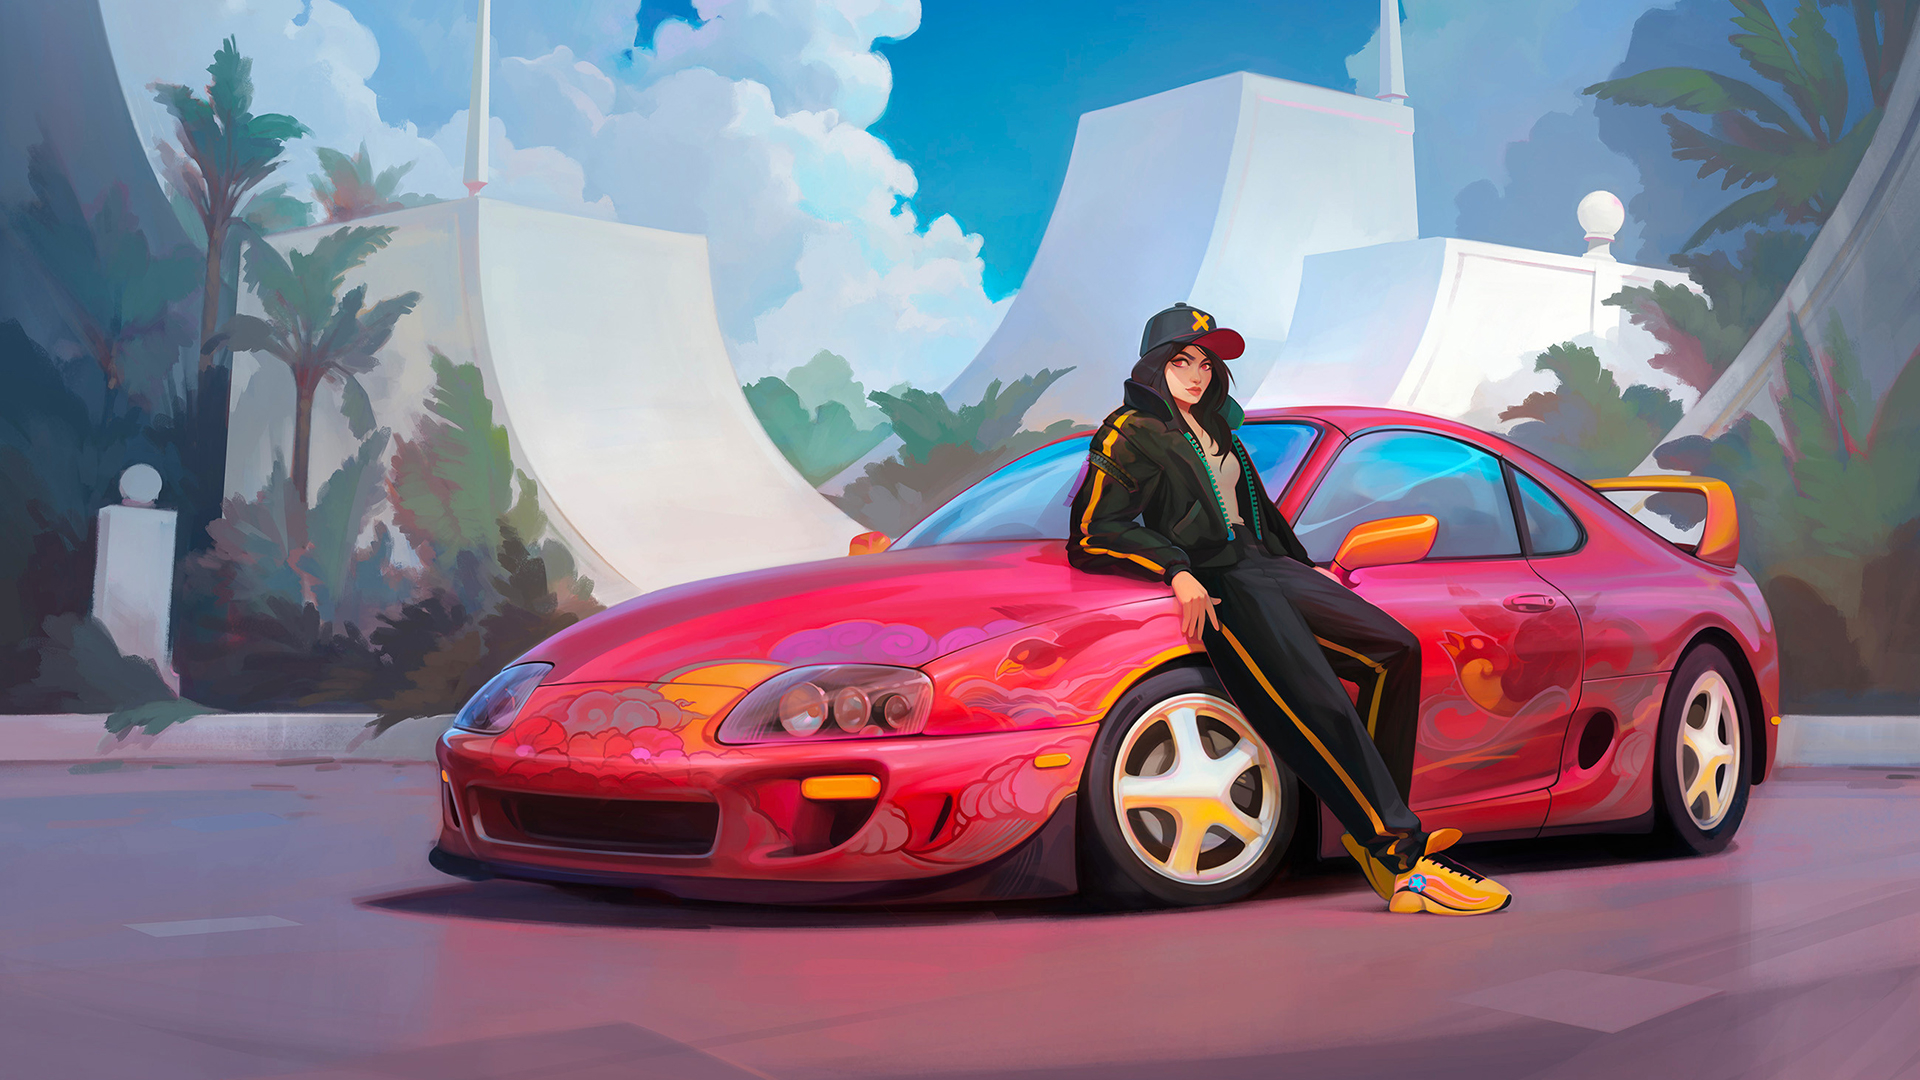 1920x1080 Wallpaper : clouds, car, Toyota Supra MK4, brunette, long hair, red eyes, trees, digital art, women with cars, vehicle, looking at viewer, leaning, hat, Women with Hats, women outdoors, red cars, dark